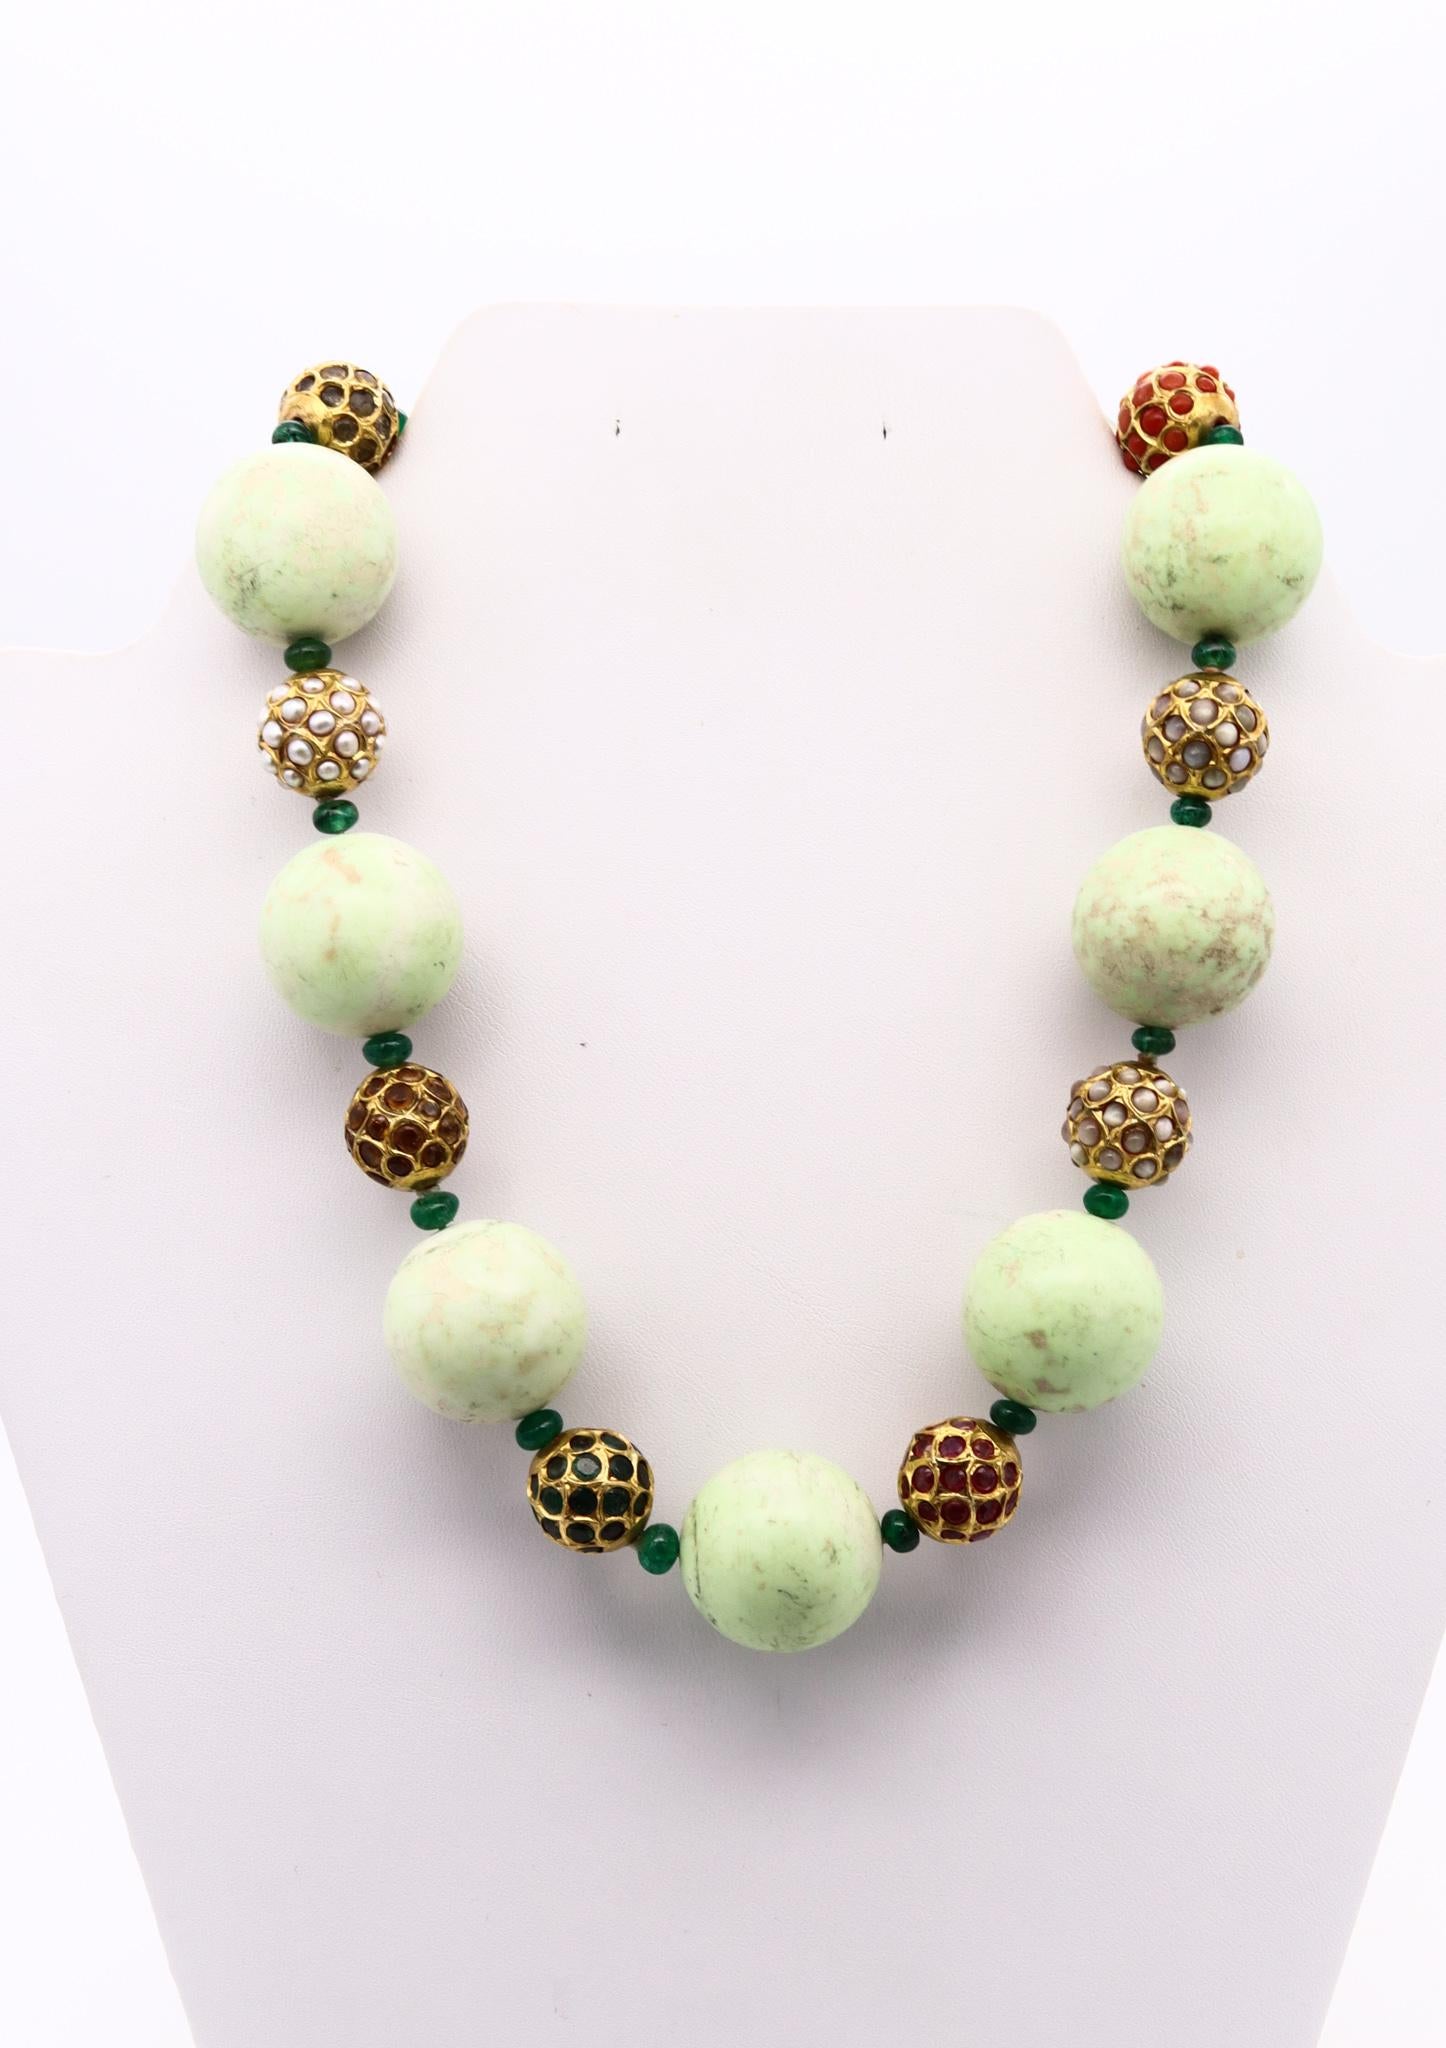 Modern Sabbadini Milano Agate Beads Necklace in 18kt Gold 45 Cts of Natural Gemstones